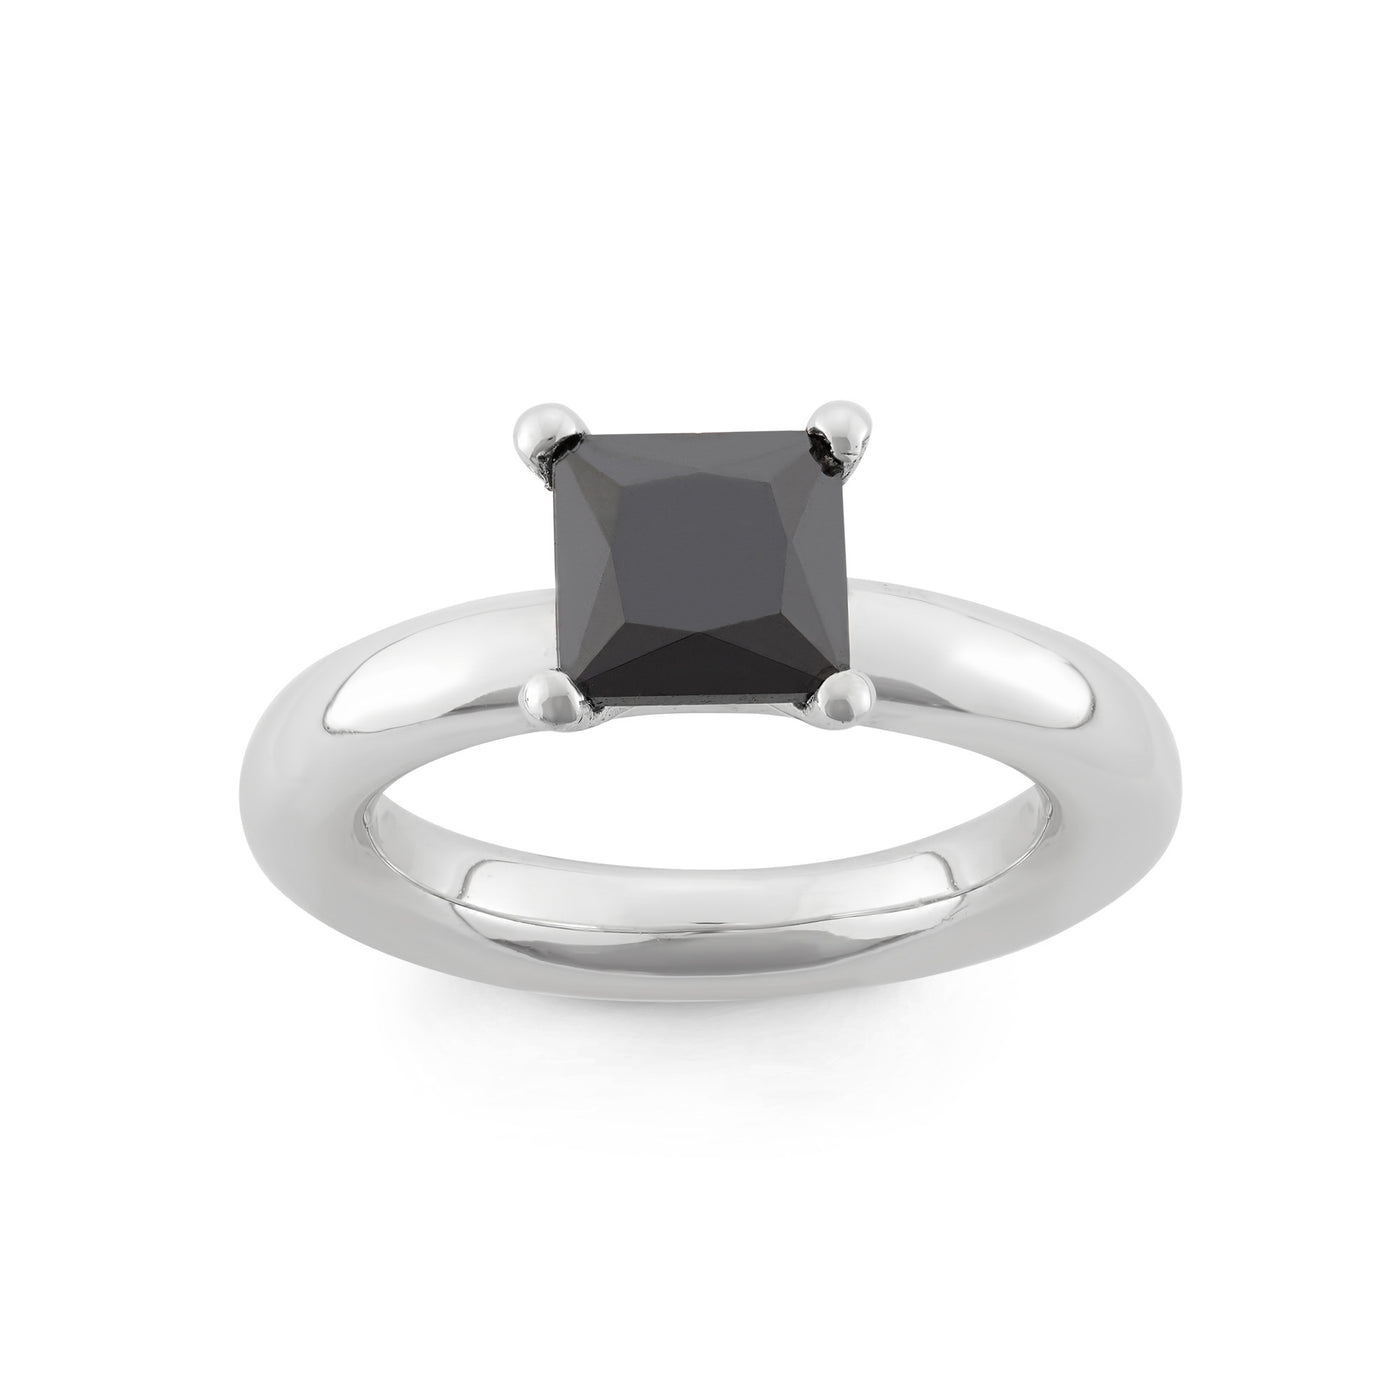 Rebecca Sloane Silver Ring With Faceted Black Square CZ Center